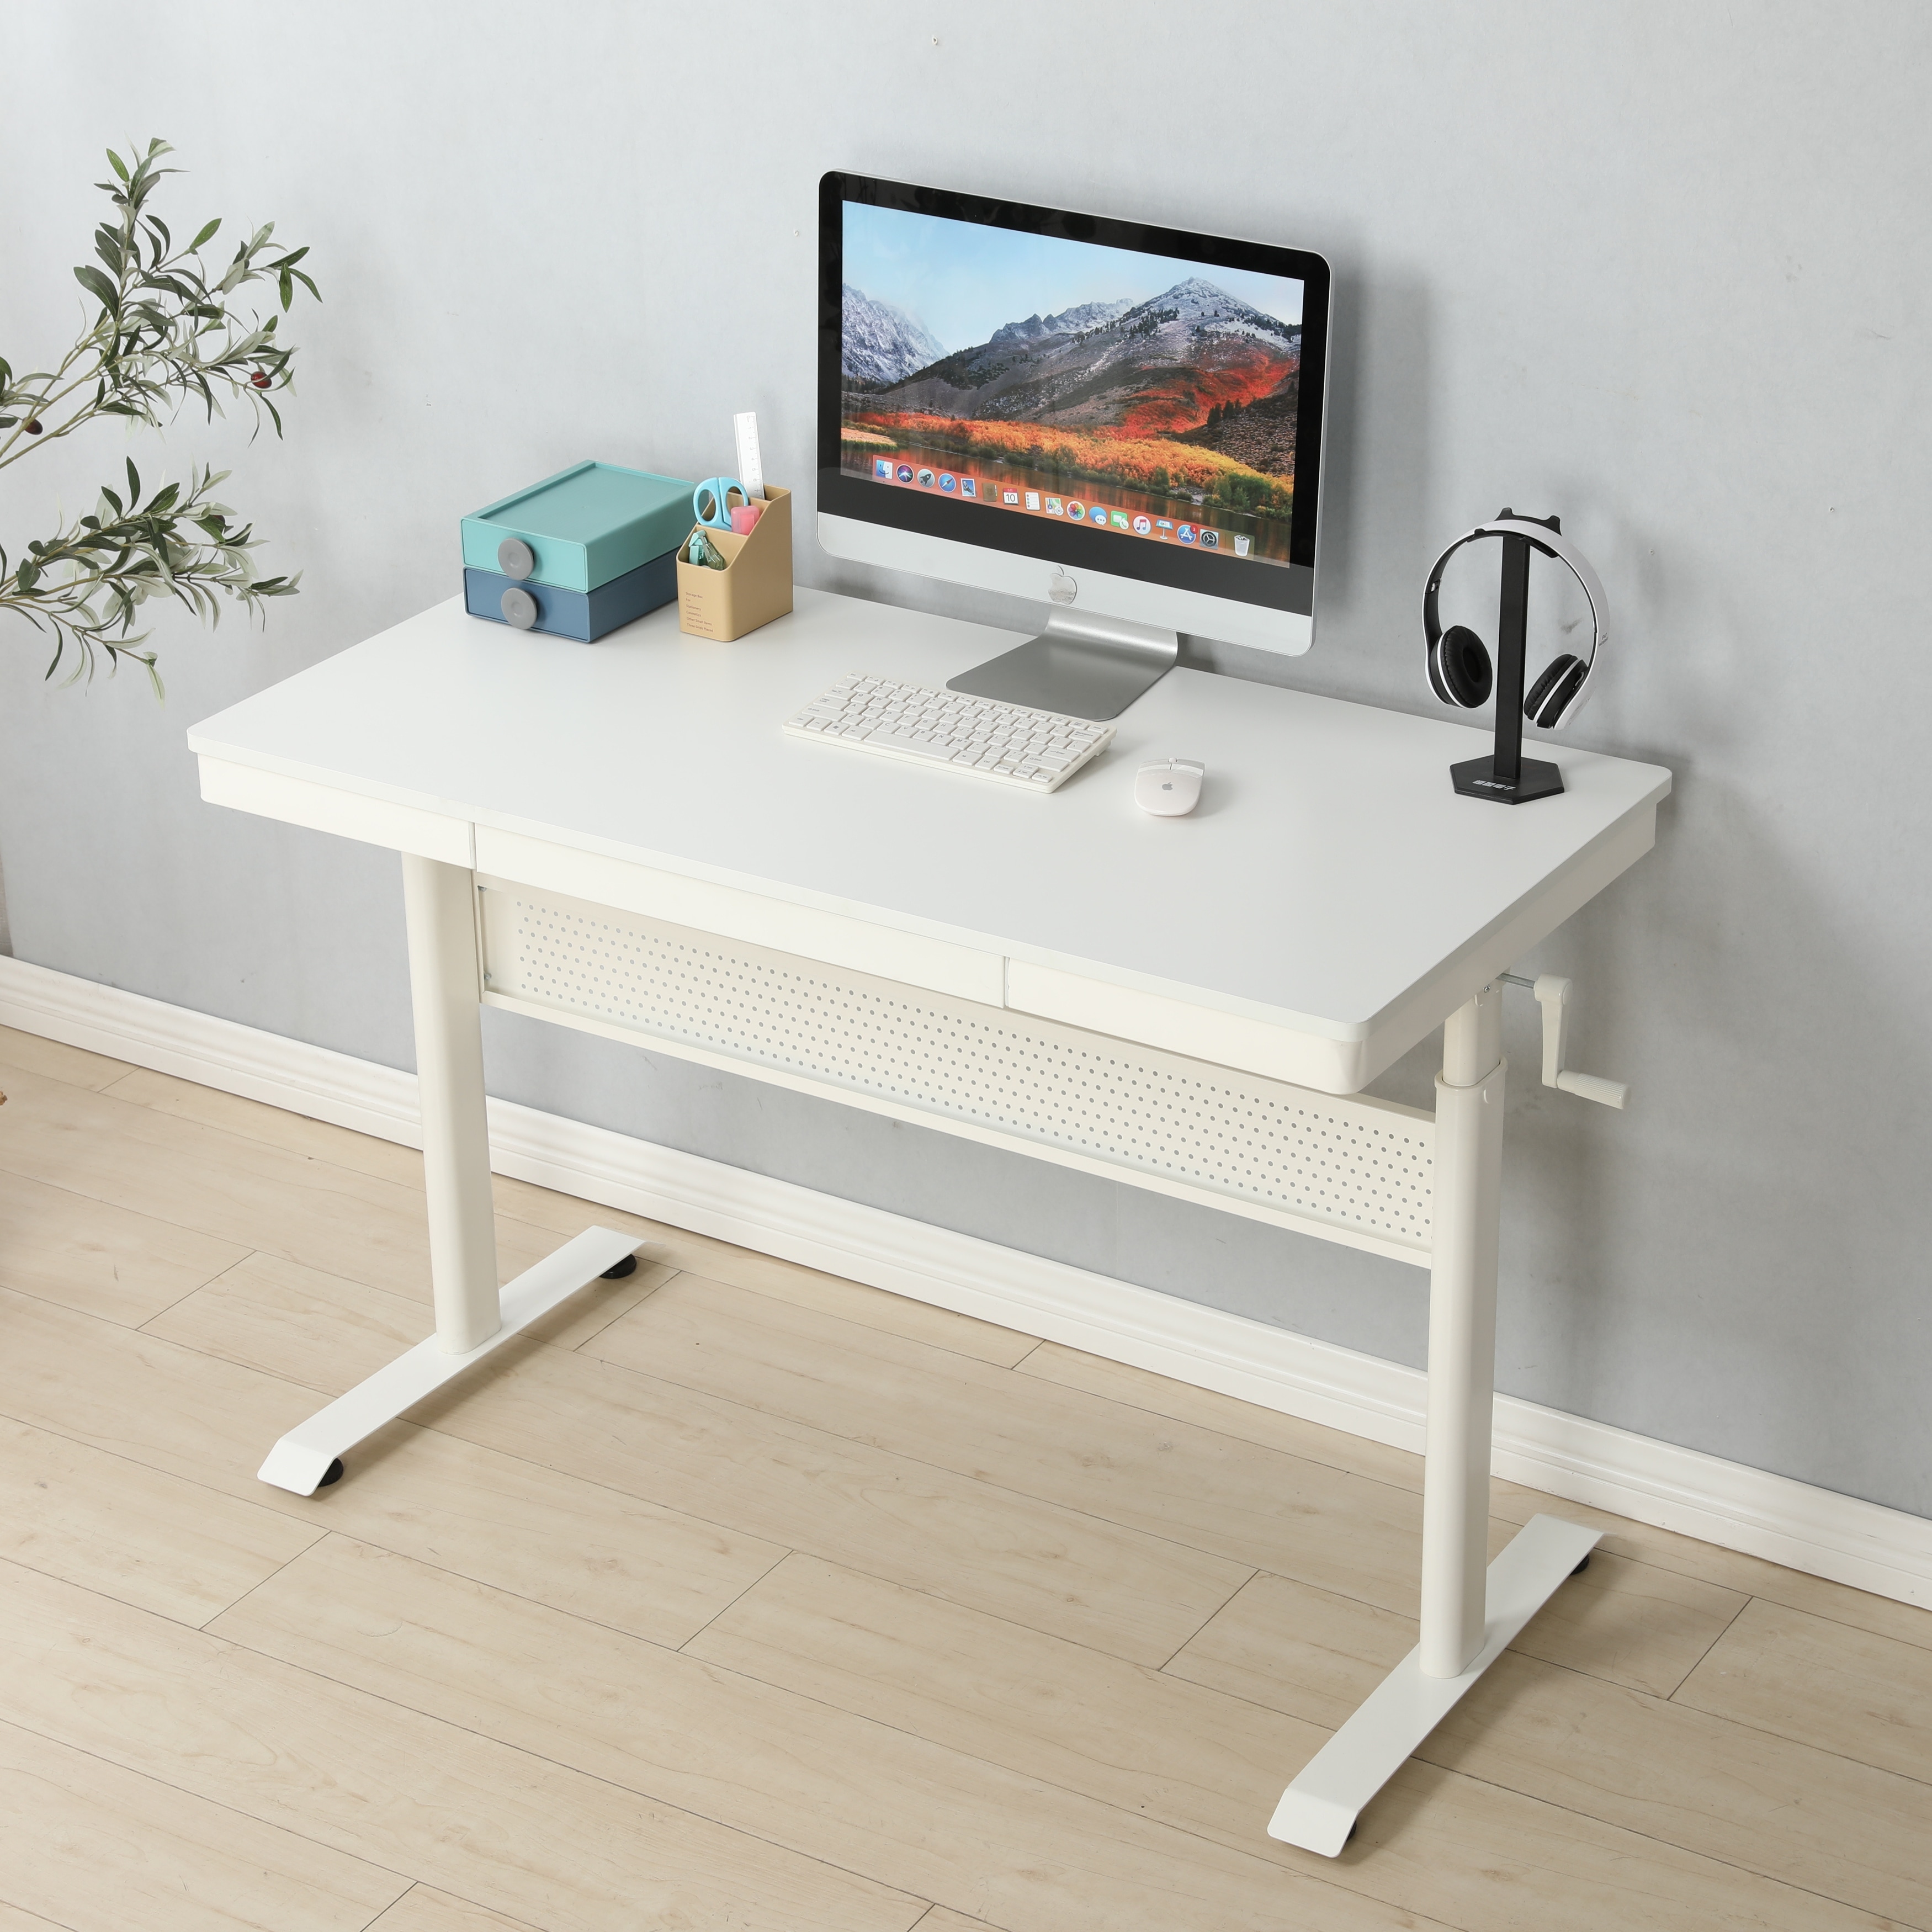 https://ak1.ostkcdn.com/images/products/is/images/direct/a47590b9915546421a2c2399dbd944f8152966ad/Standing-Desk-with-Metal-Drawer-Adjustable-Height-Student-Desks-Ergonomic-Workstation-Sit-Stand-Home-Office-Desk.jpg